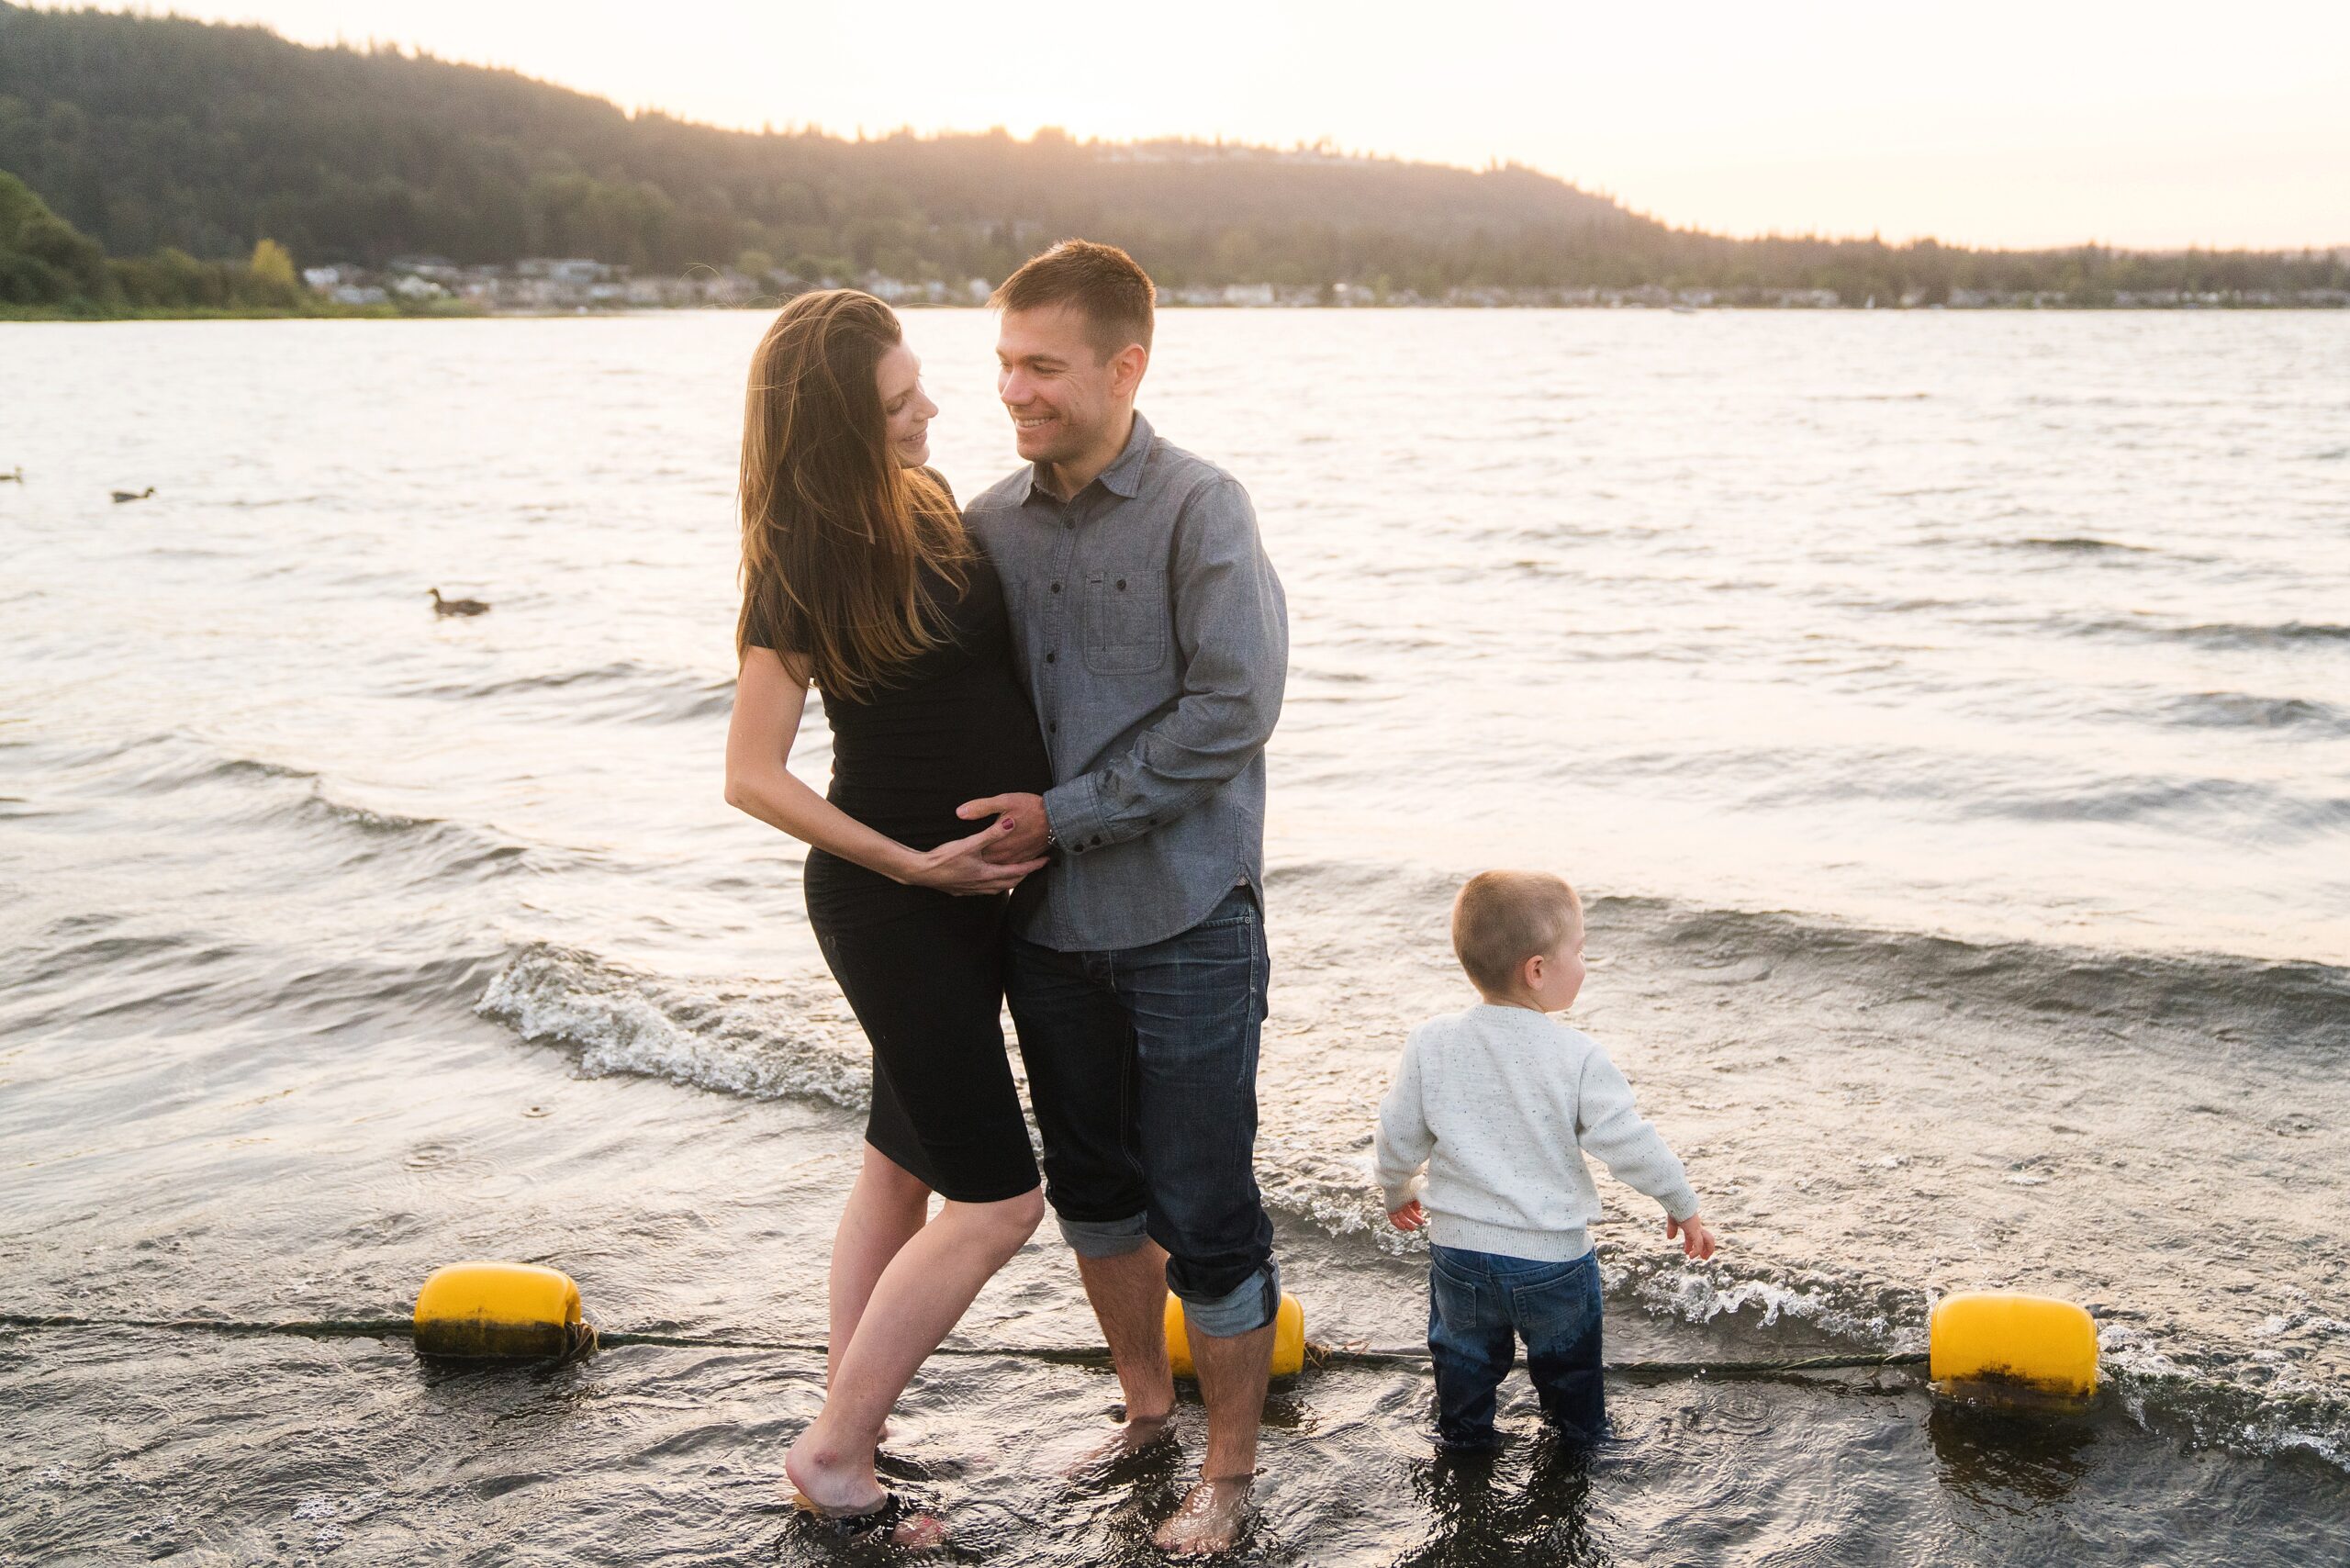 Lifestyle Maternity photo in Lake Sammamish with toddler nearby